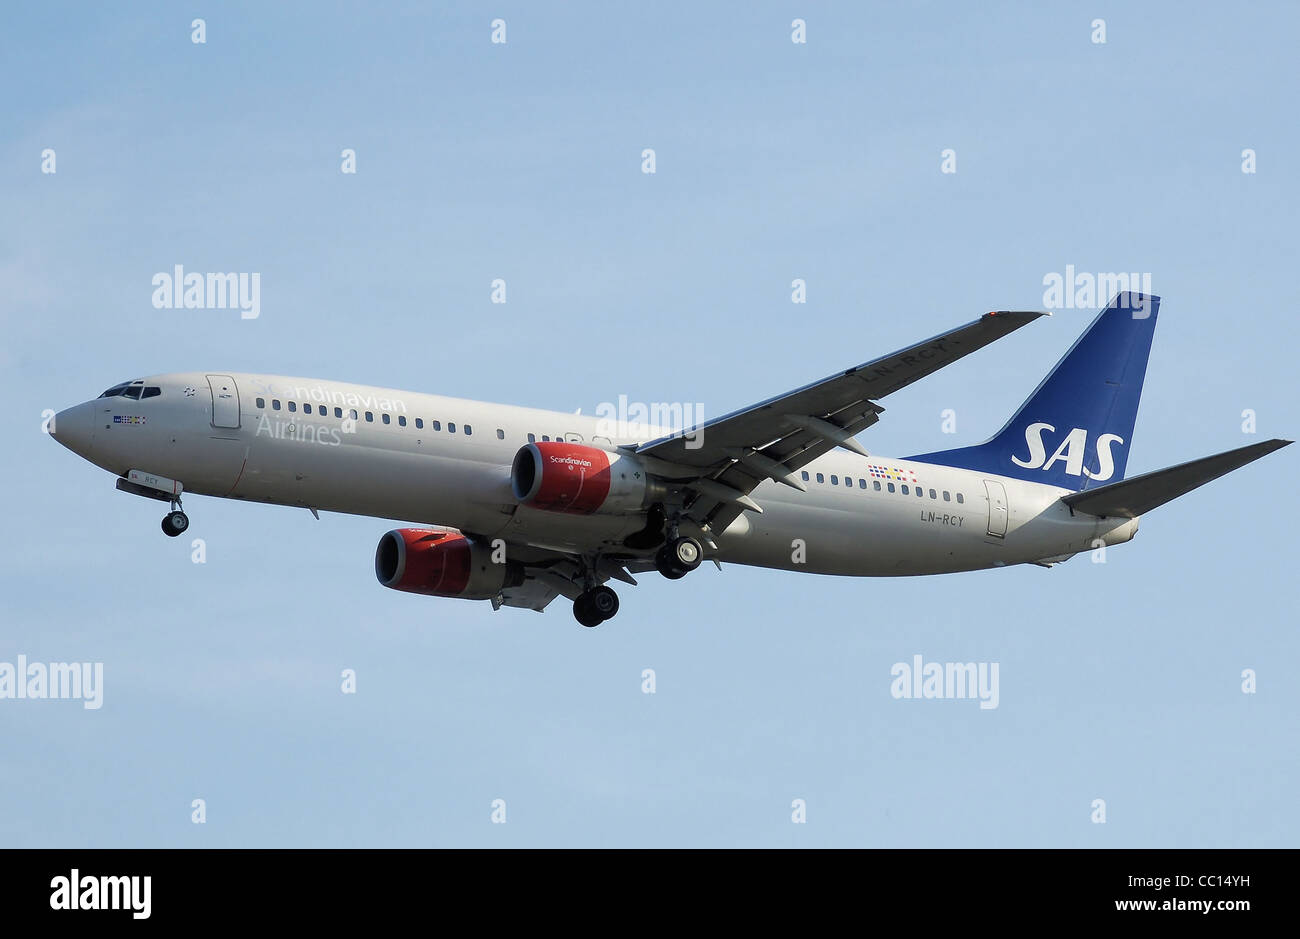 SAS Scandinavian Airlines Boeing 737-800 (LN-RCY) lands at London Heathrow Airport, England. Stock Photo